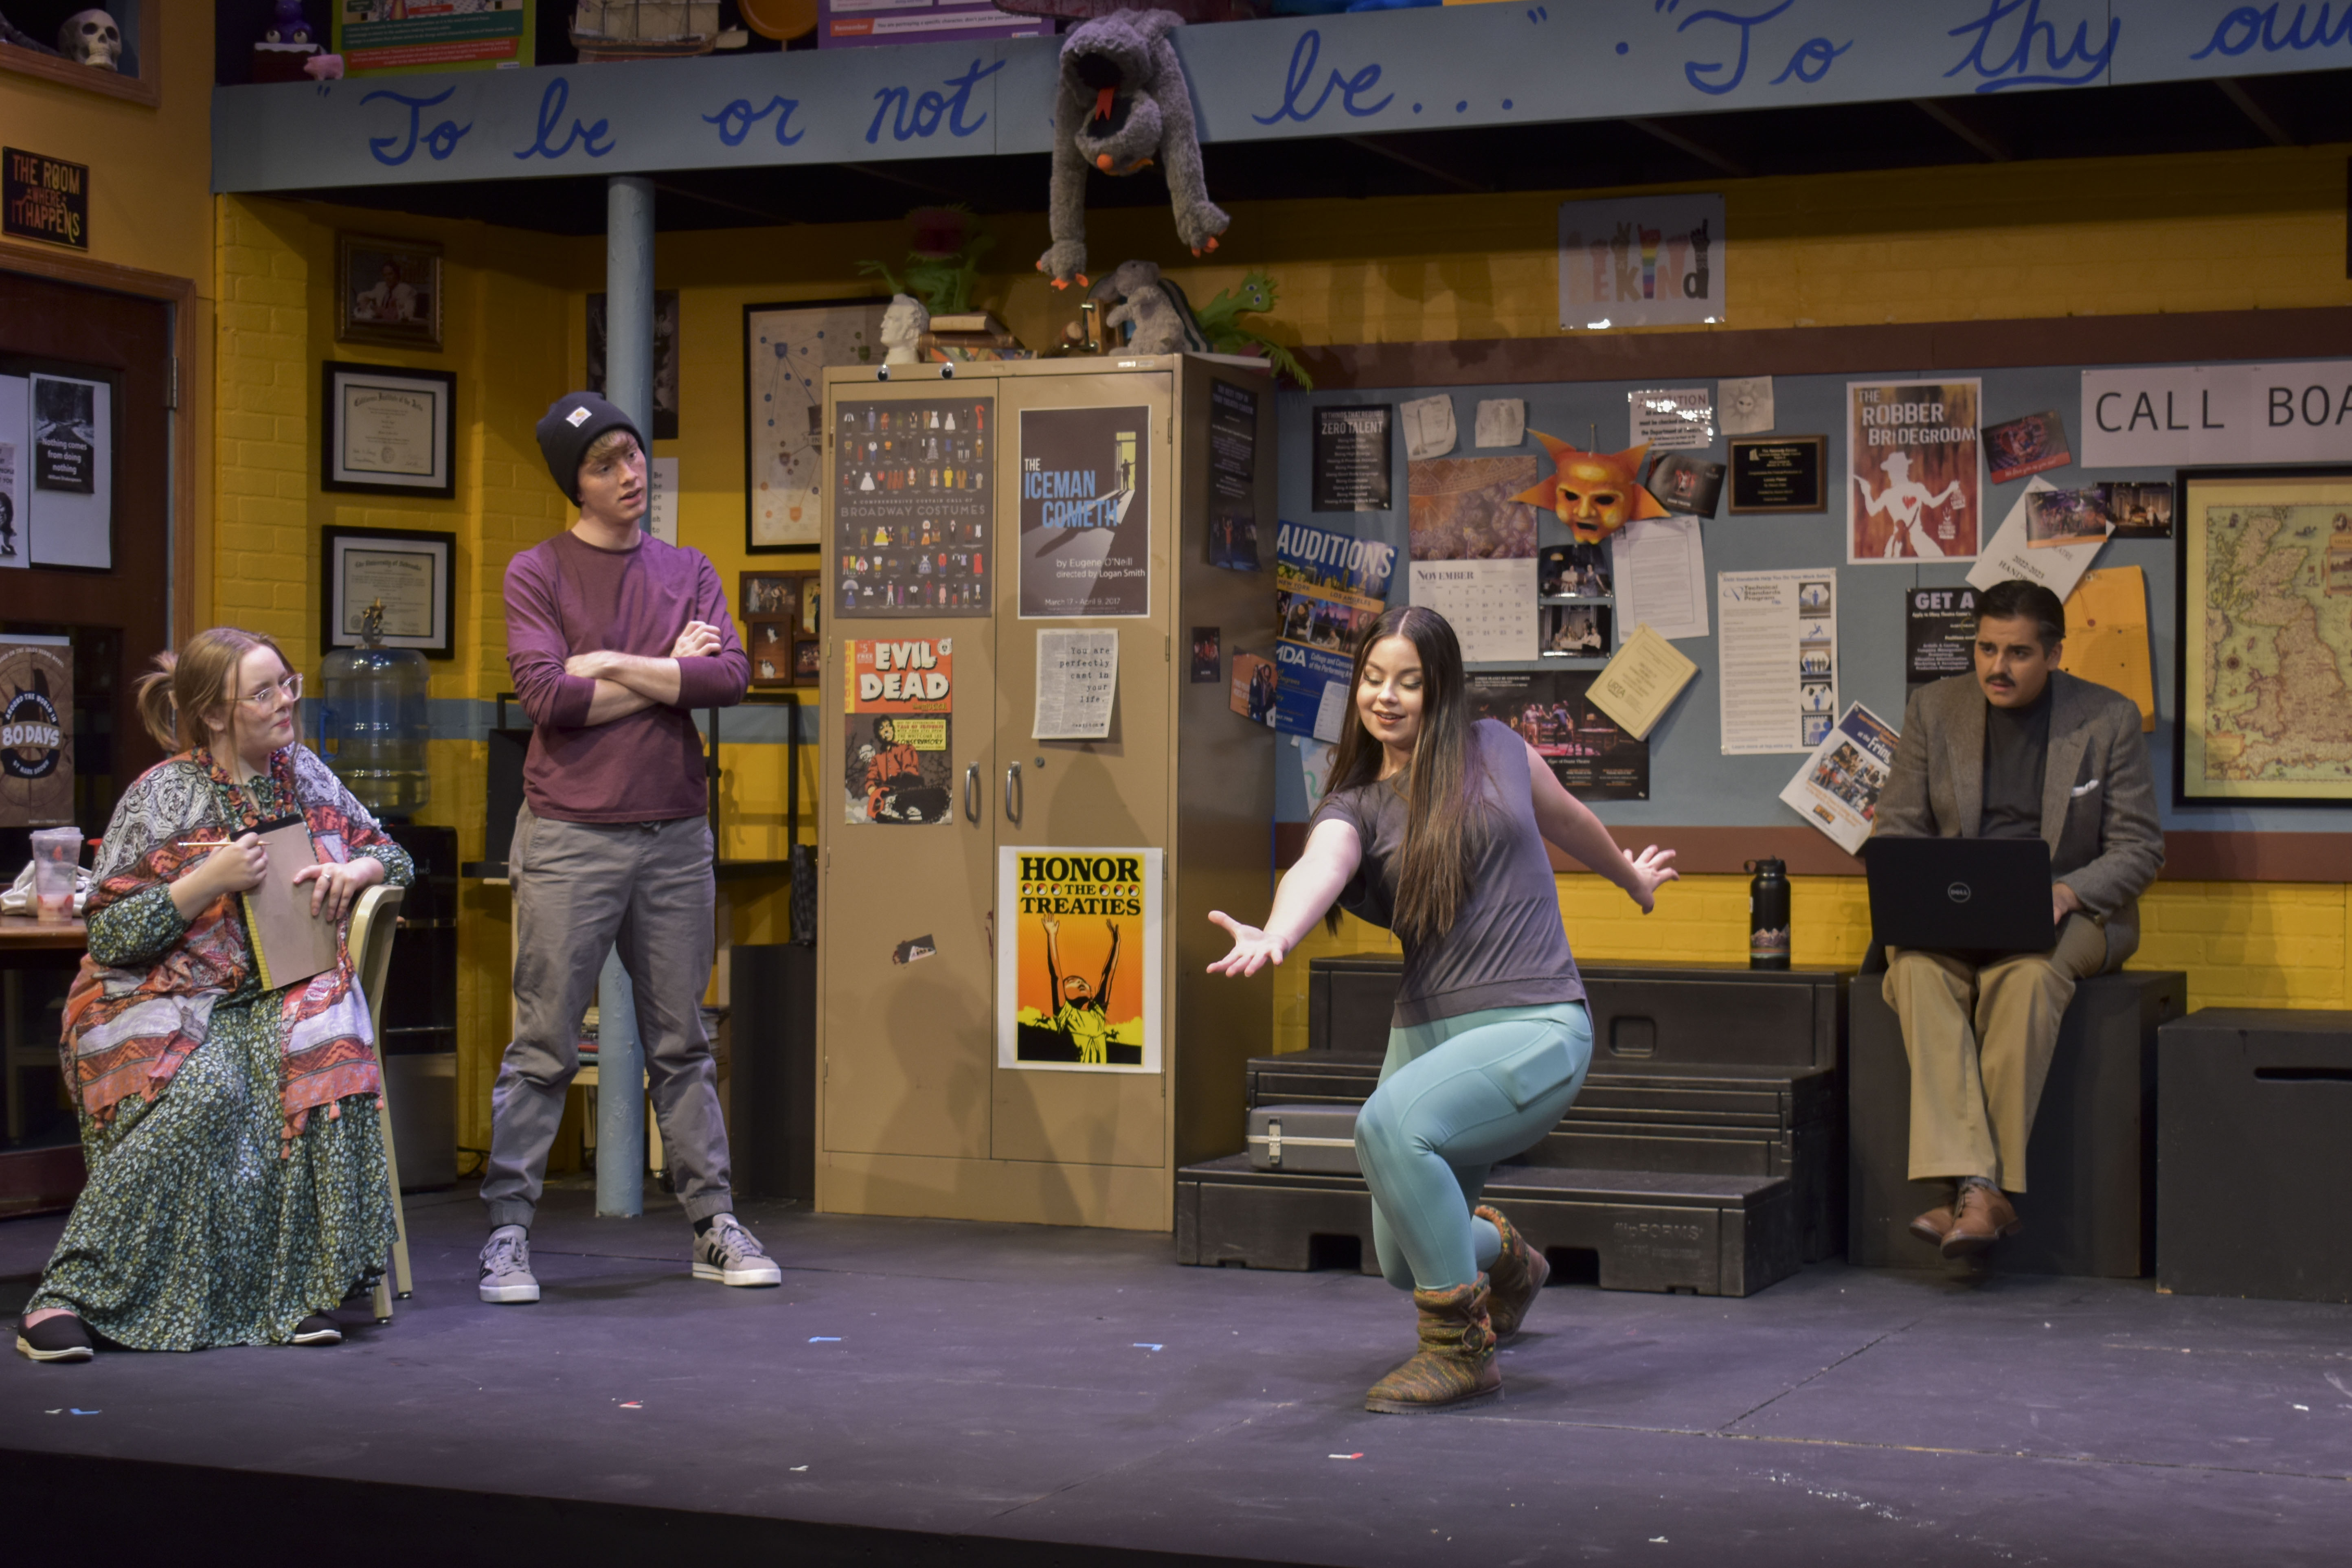 Four actors pose on a stage, with one miming a bowling motion. The stage has two levels, and a puppet dangles precariously from the second above the words "To Be or Not To Be." The rest of the set looks like a theatre classroom, with a desk and chairs, posters covering the walls and props littered around the edges.